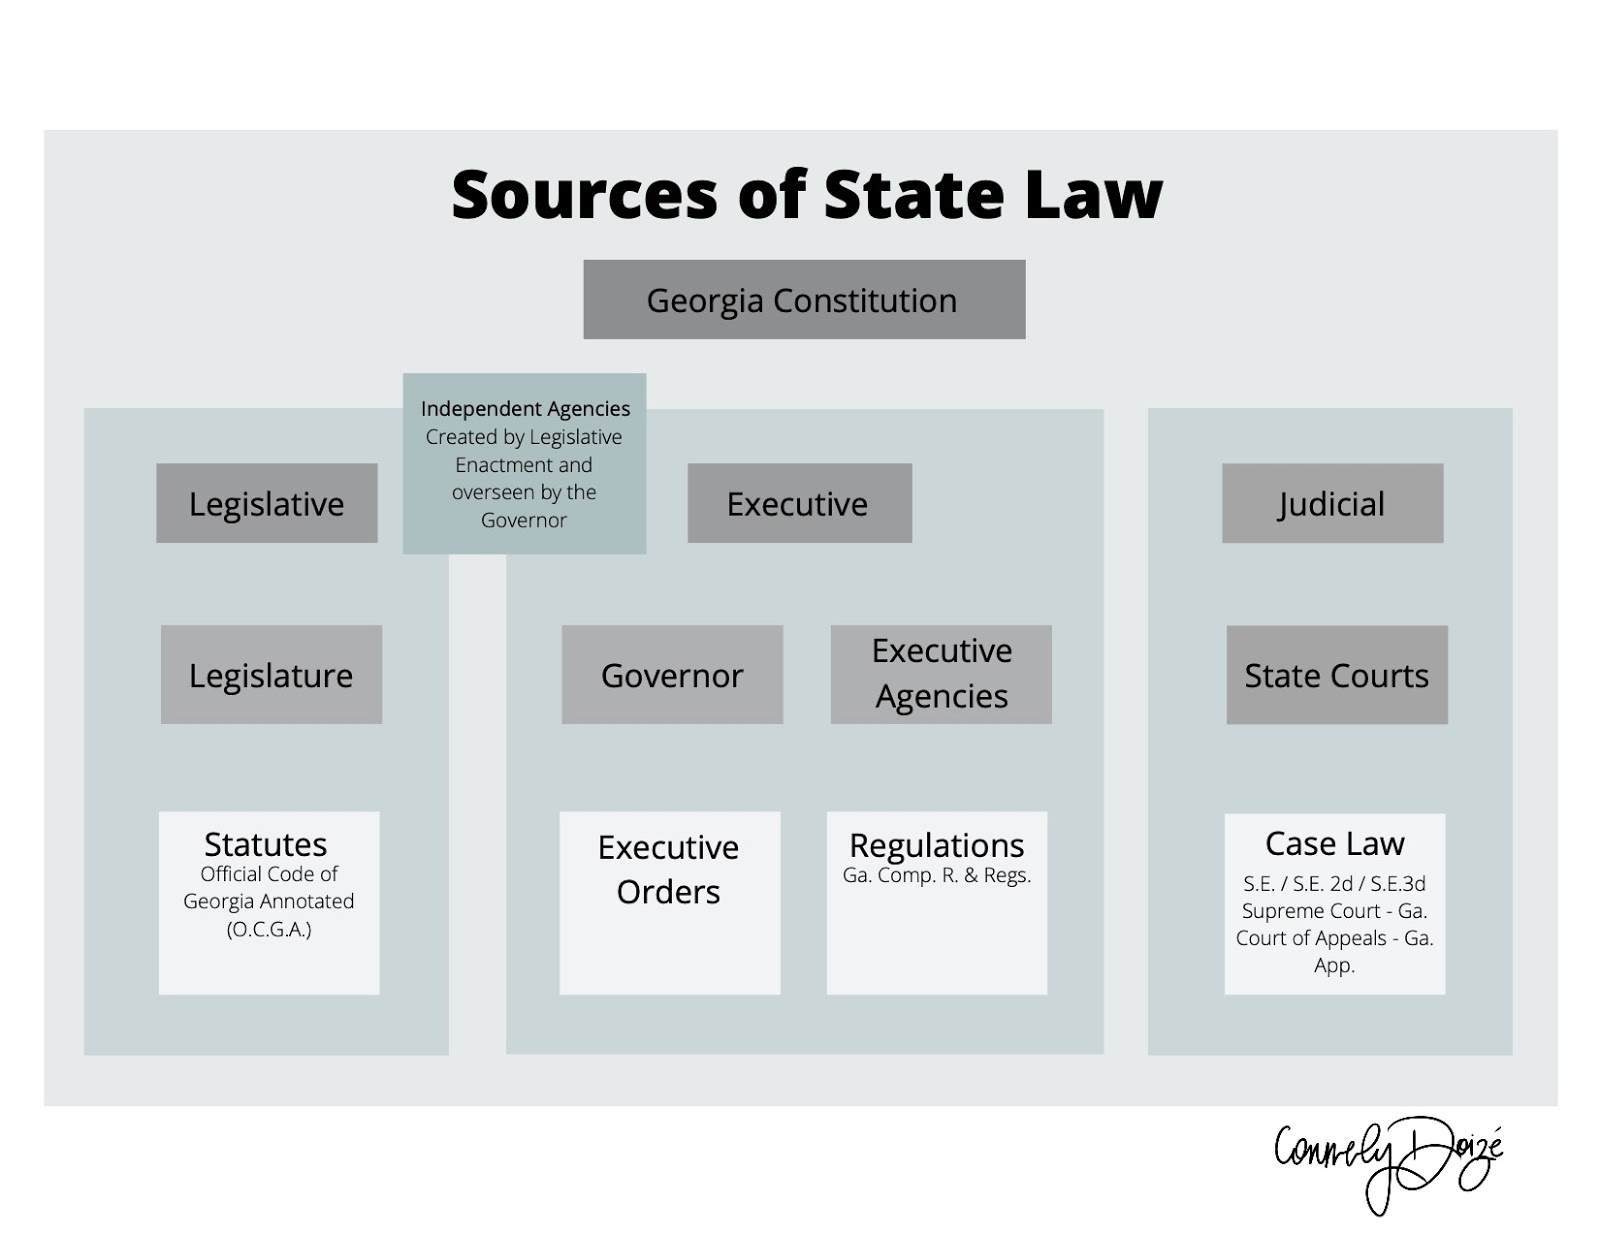 Graphic 2 - Sources of State Law using Georgia